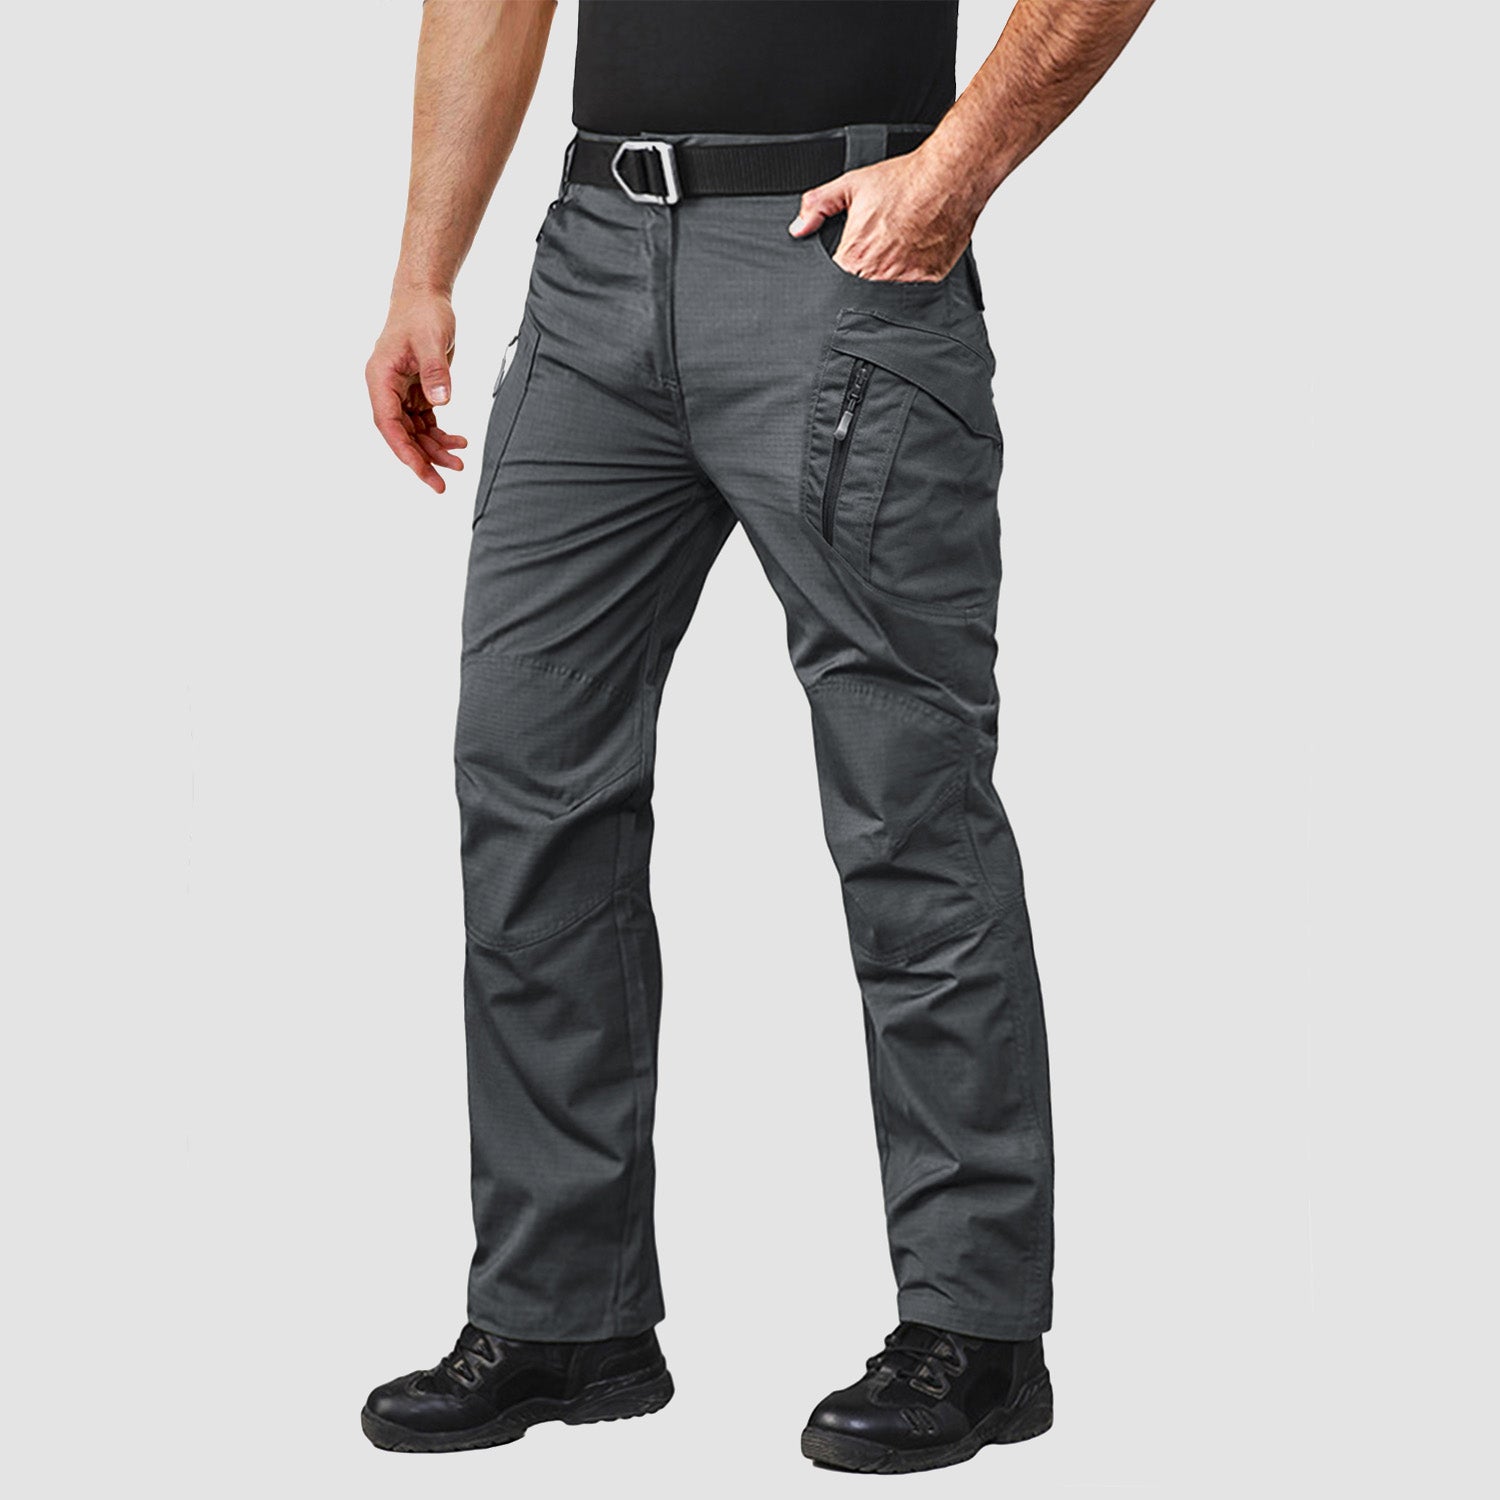 Men's Tactical Pants with 9 Pockets Rip-Stop Work Hiking Pants